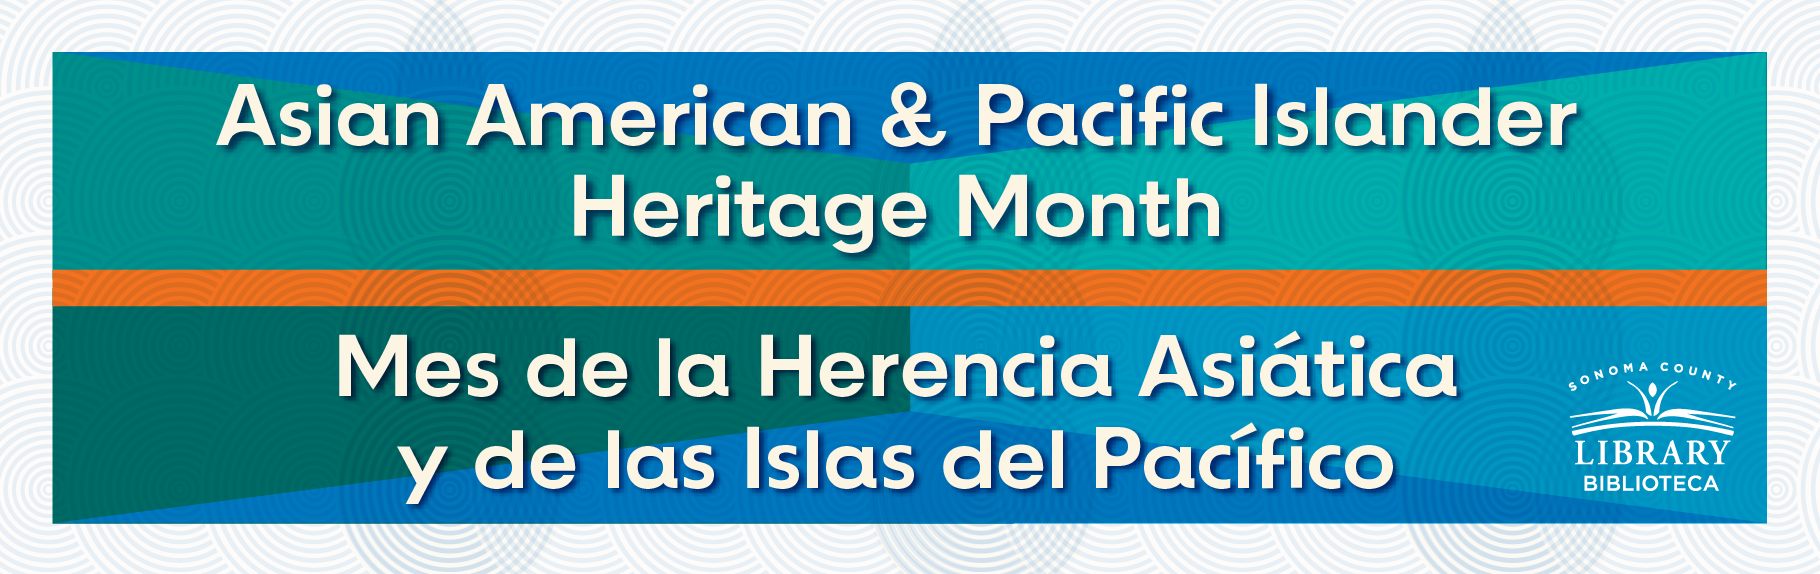 AAPI Heritage Month image